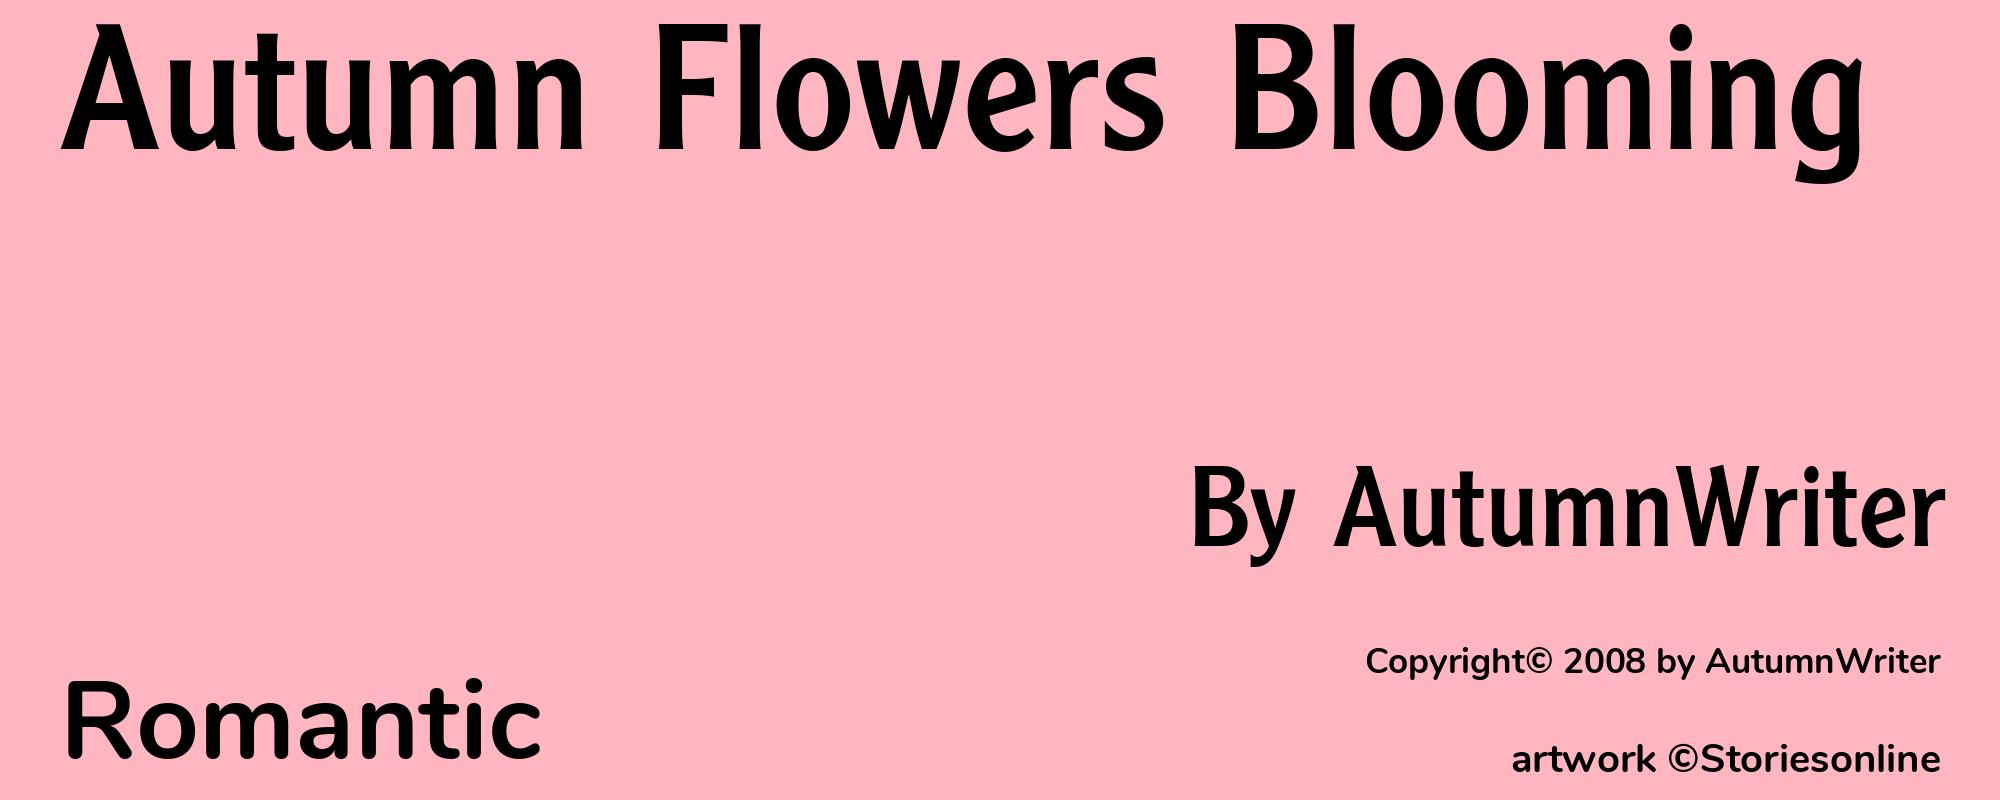 Autumn Flowers Blooming - Cover